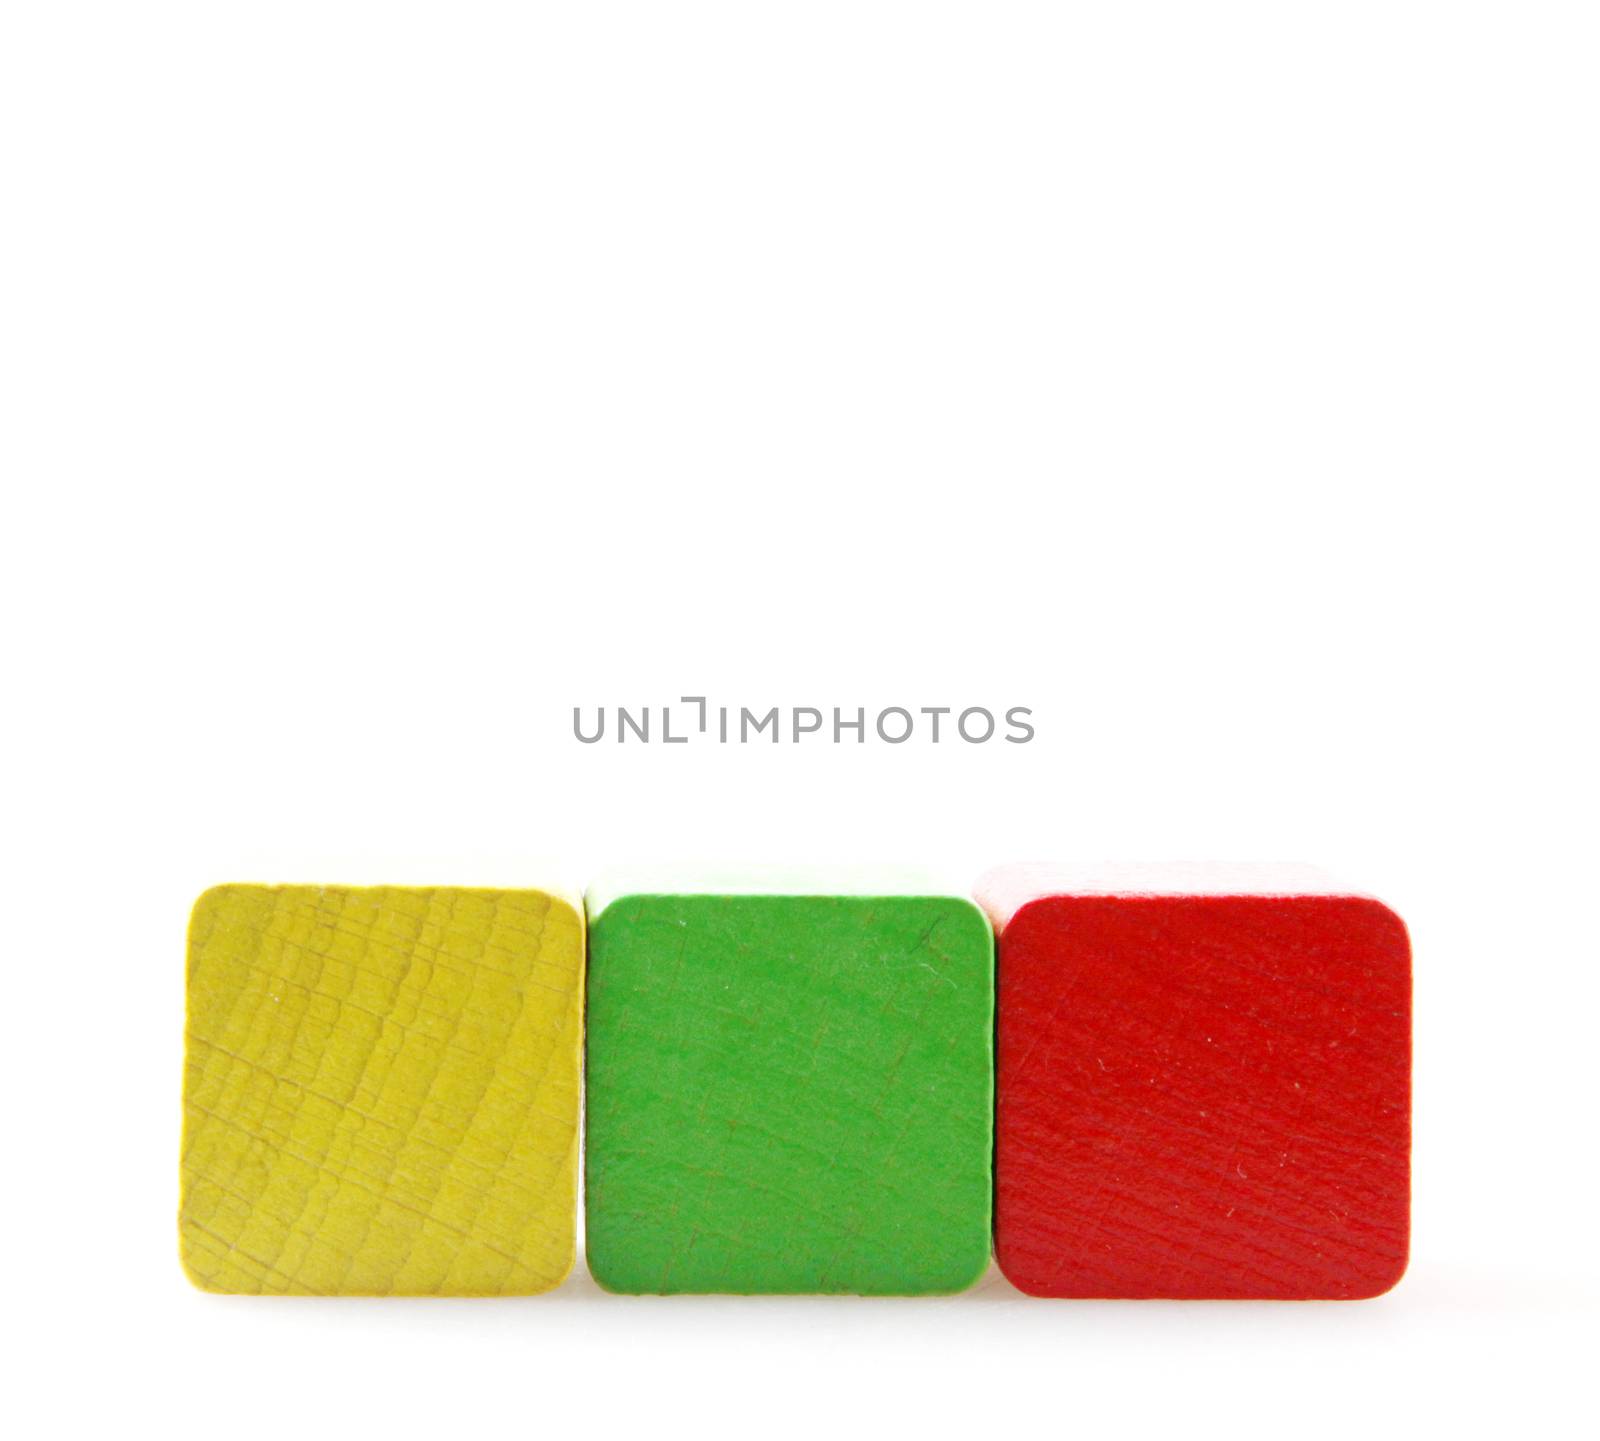 Colorful Wooden Blocks Isolated On White Background by nenovbrothers